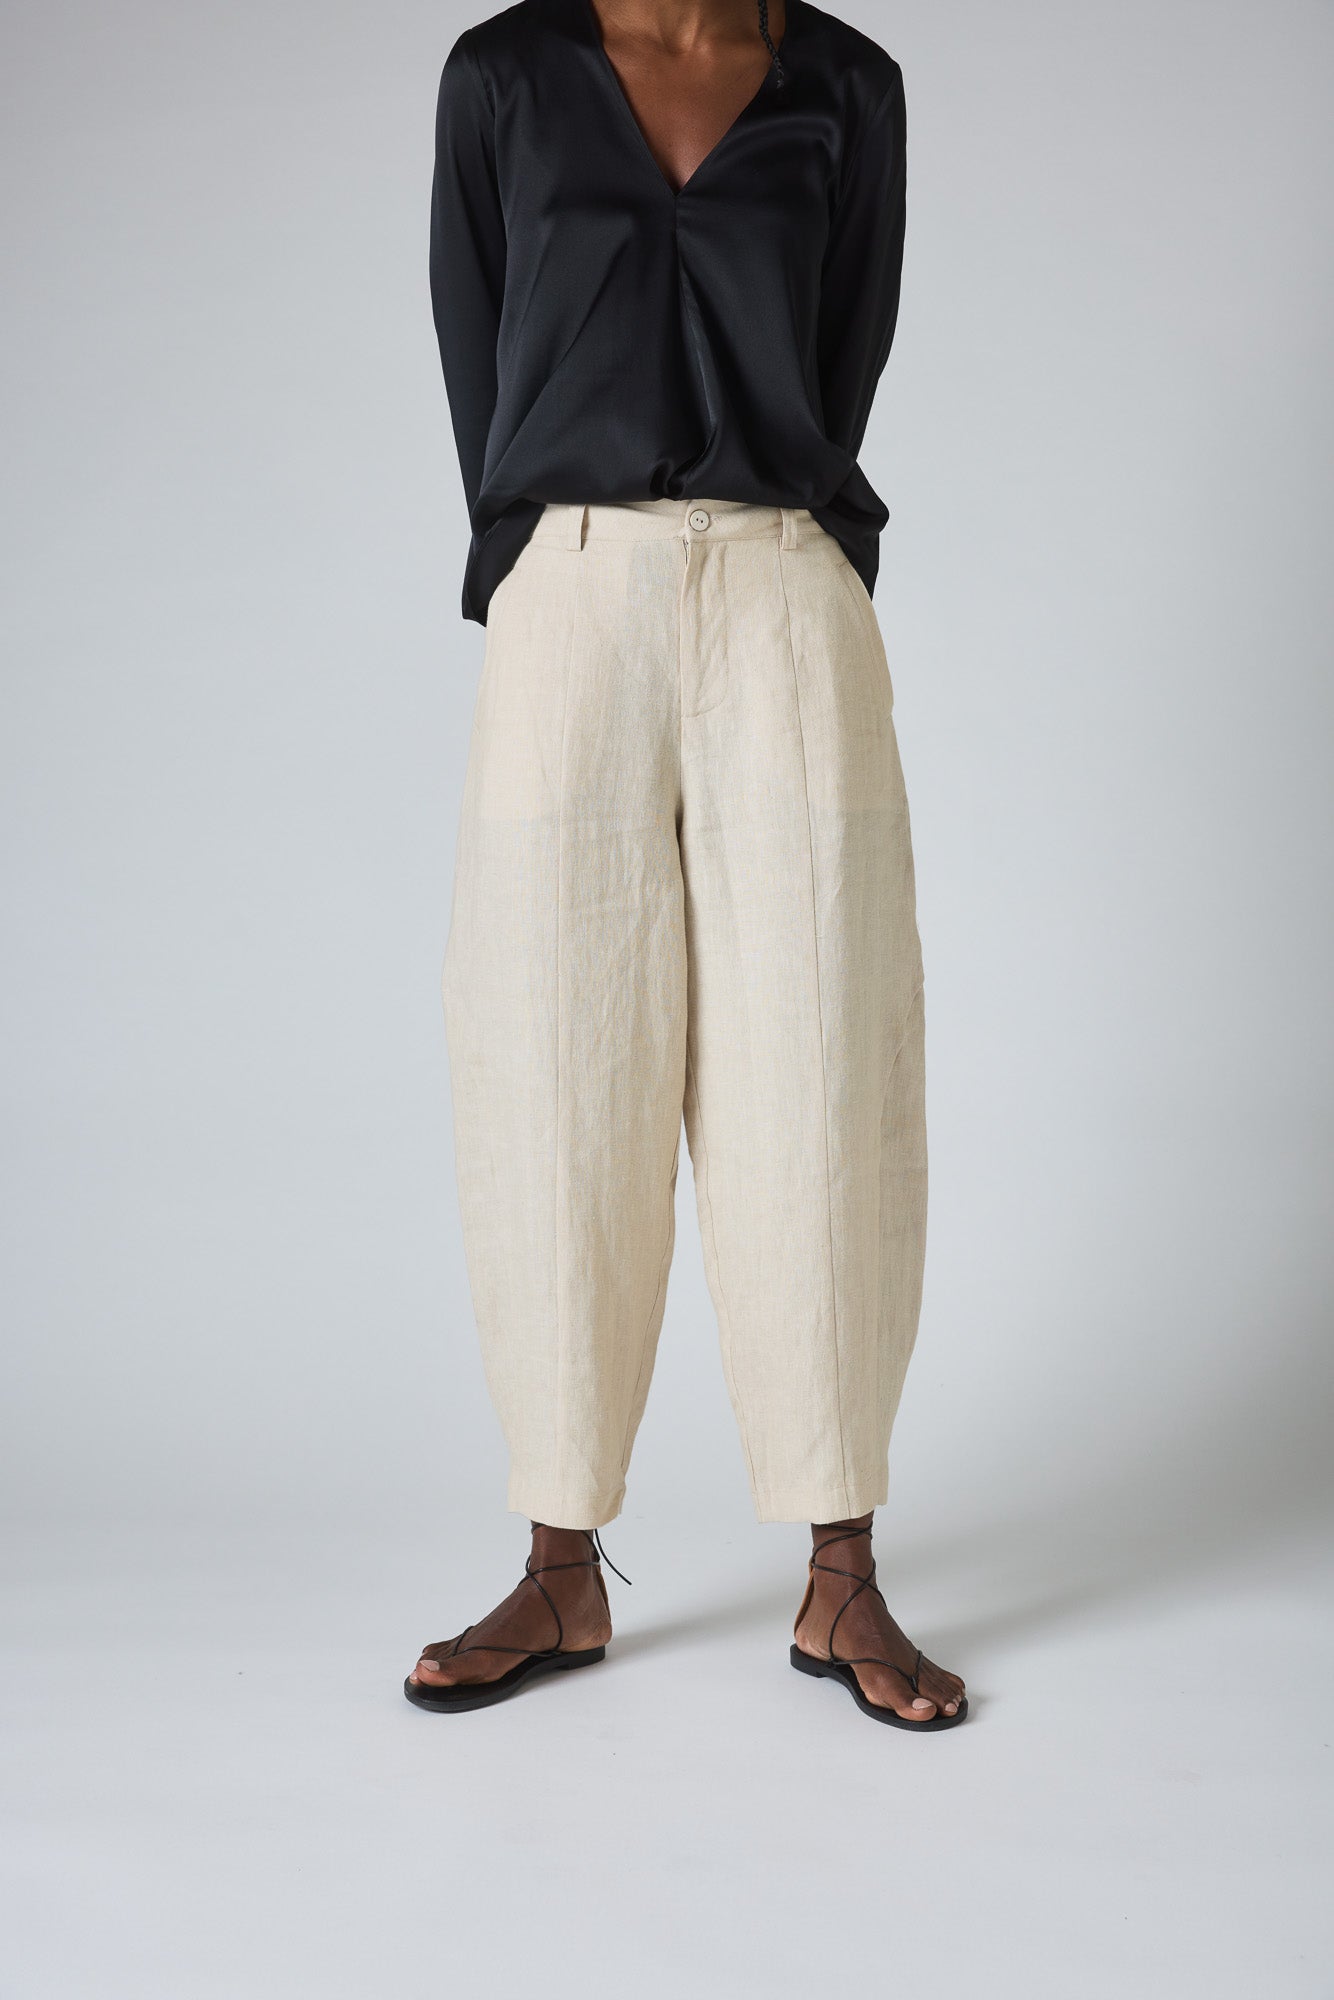 SKY BLUE LINEN PANT (RELAXED TAPERED FIT) – ROOKIES